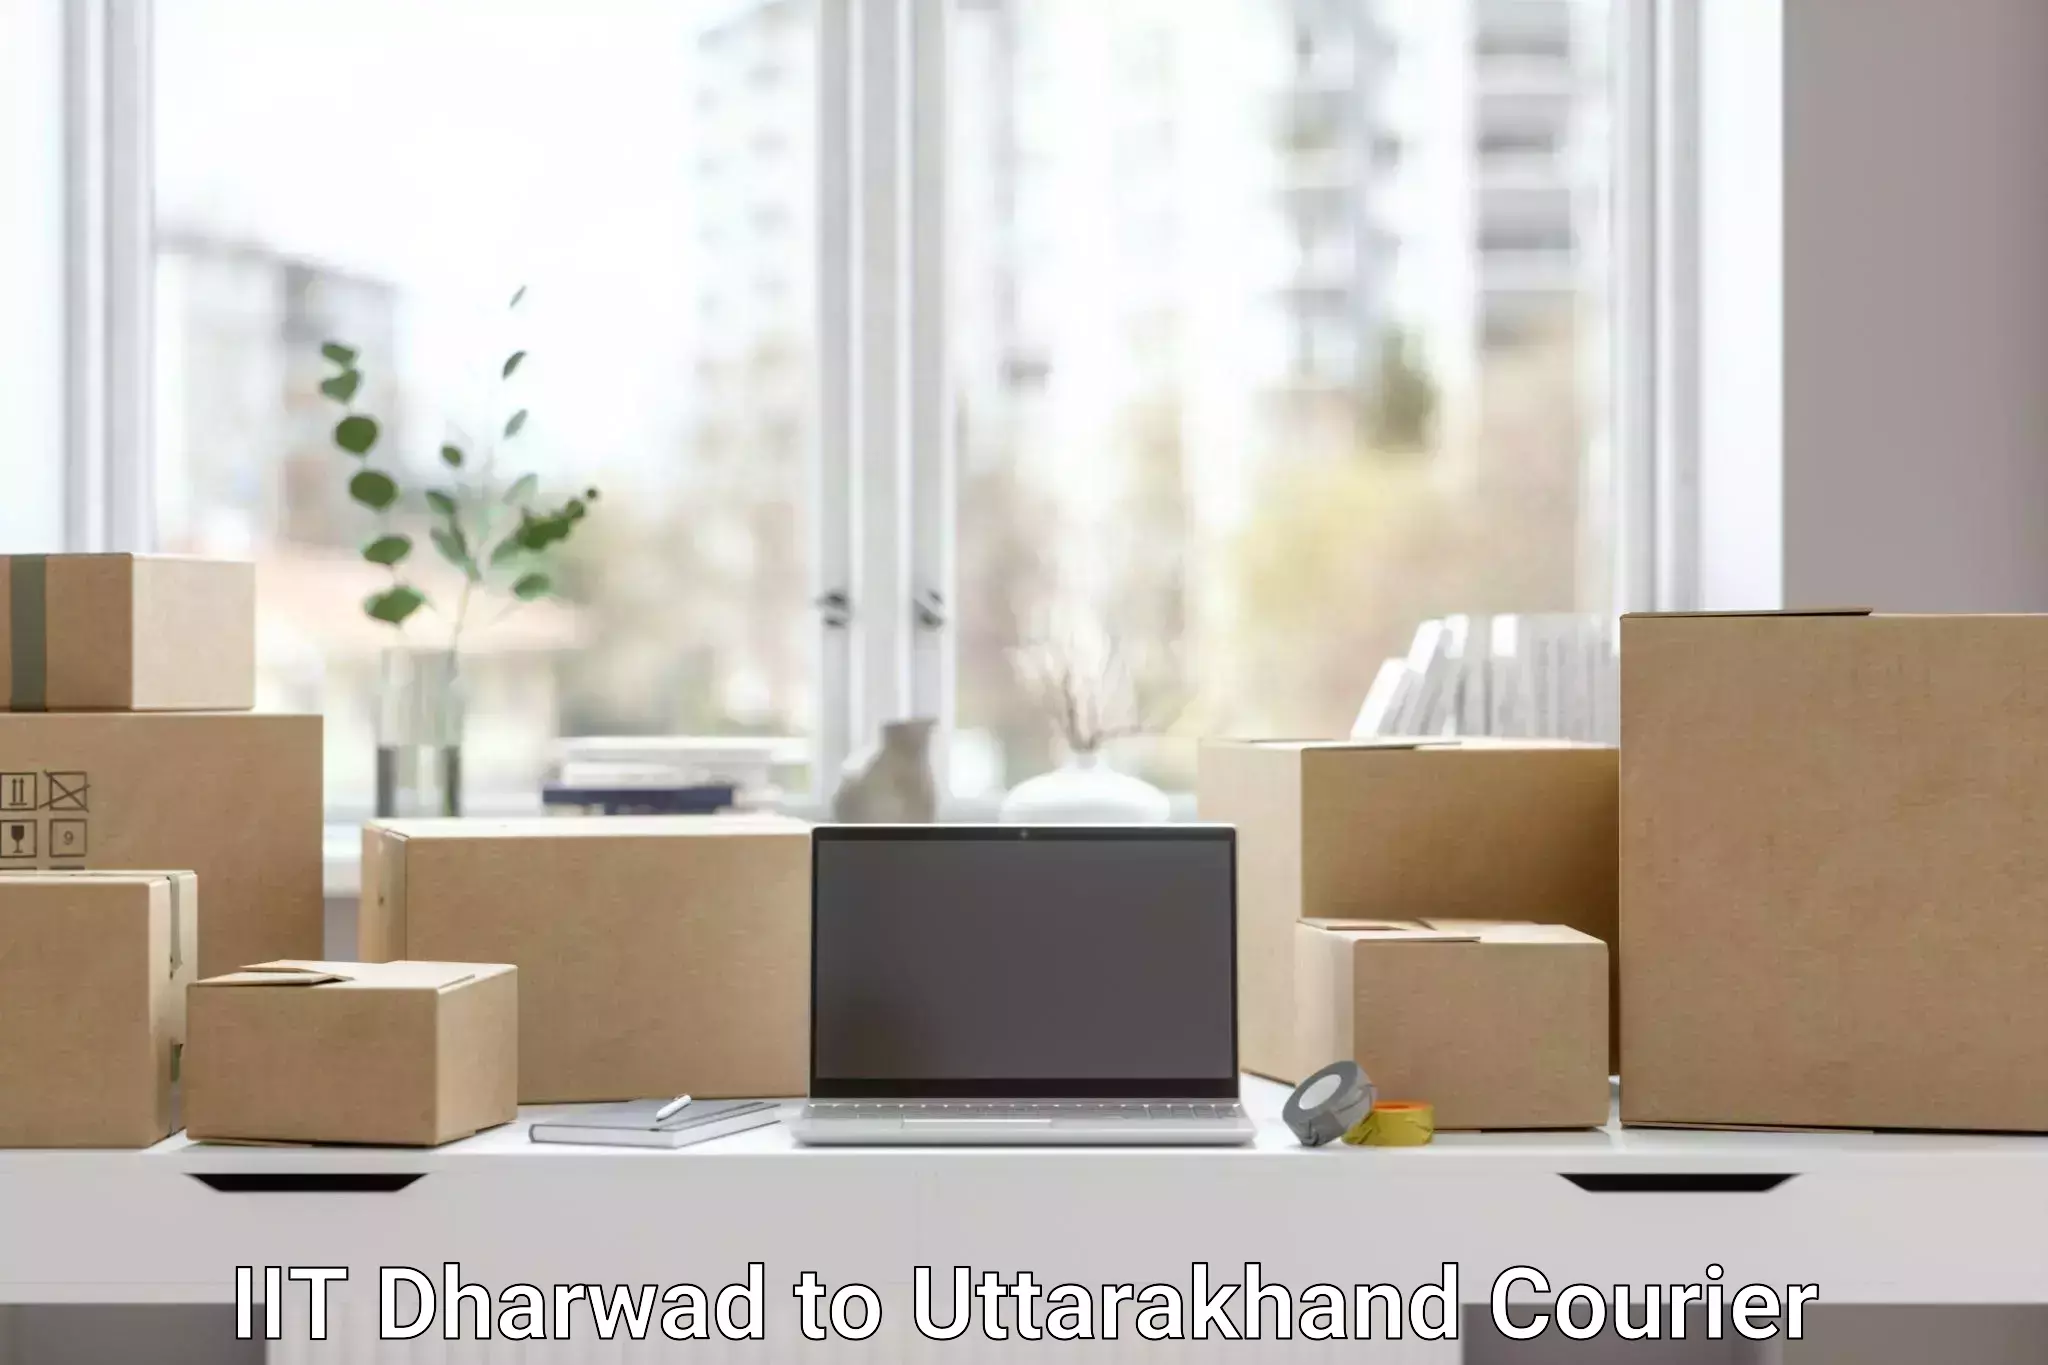 Quality courier services IIT Dharwad to Doiwala